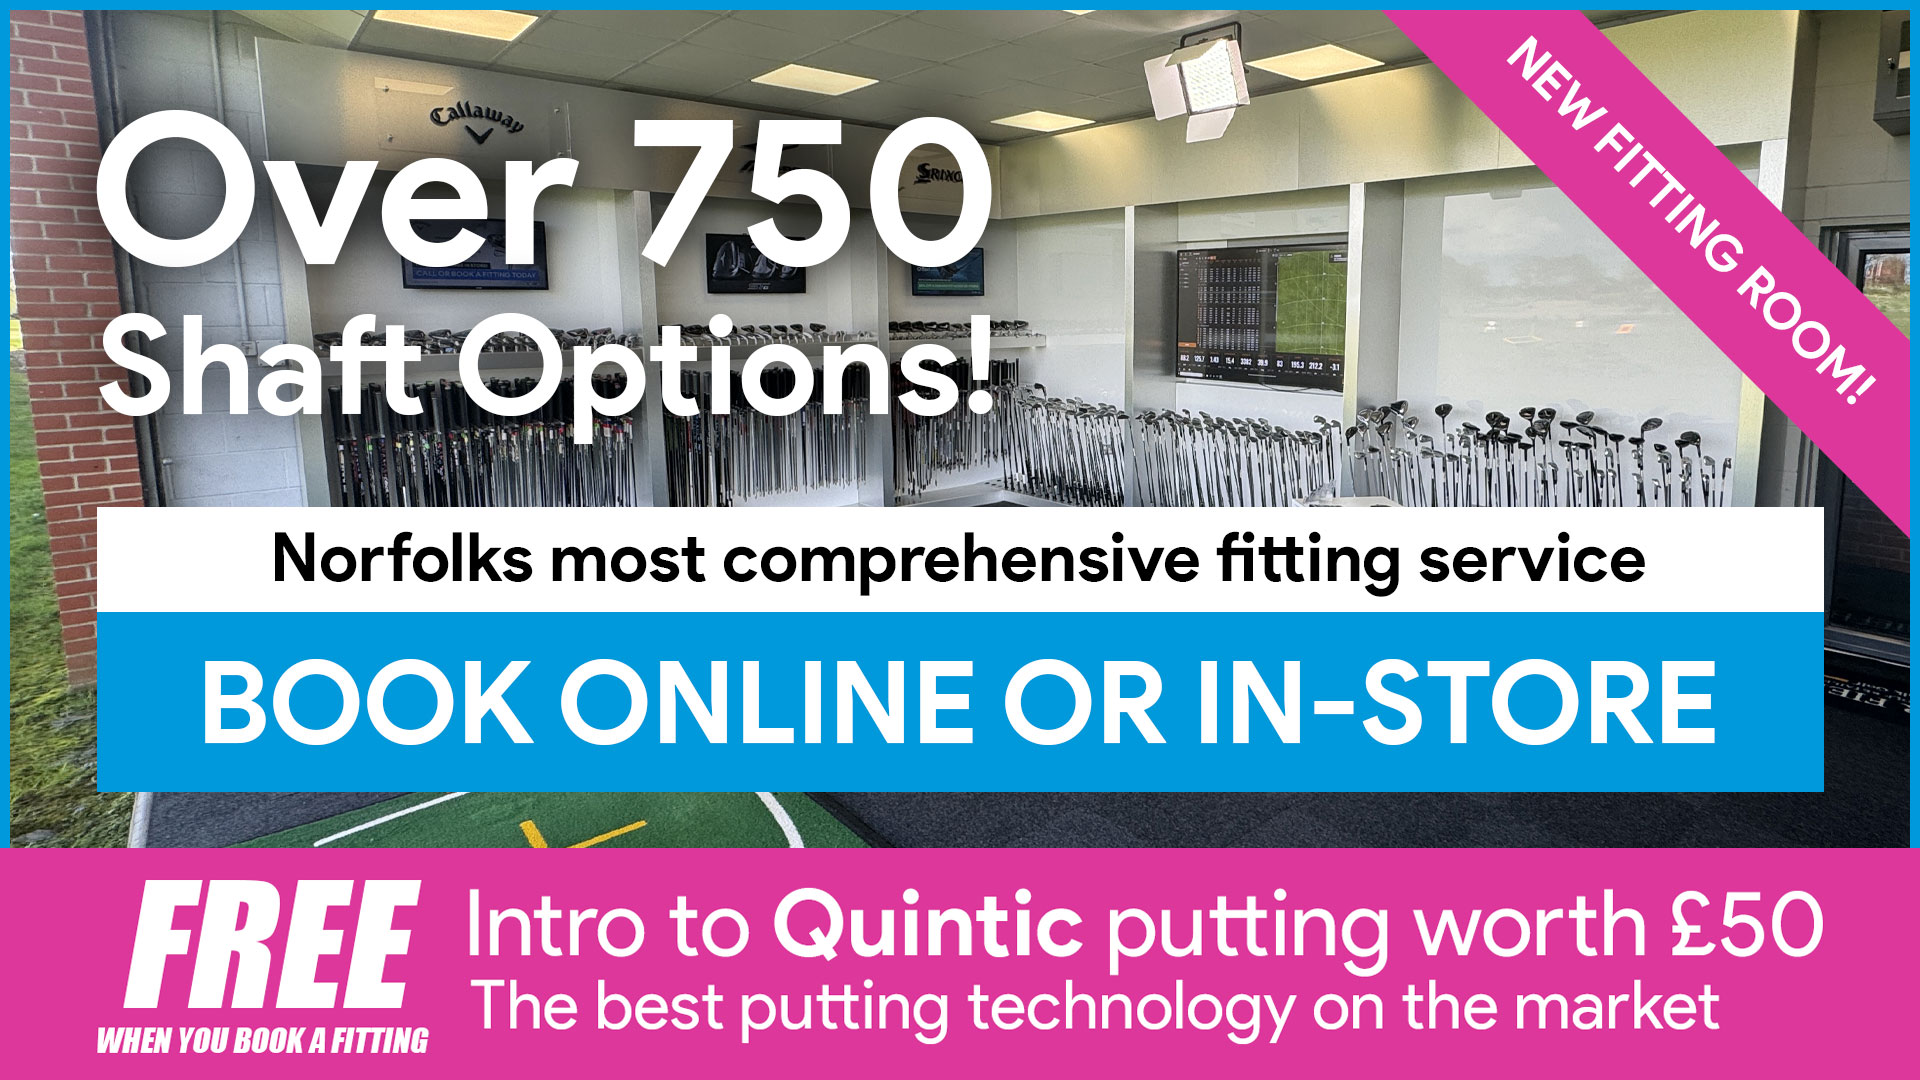 FREE 'Intro to Quintic' putting when you book a custom fitting.